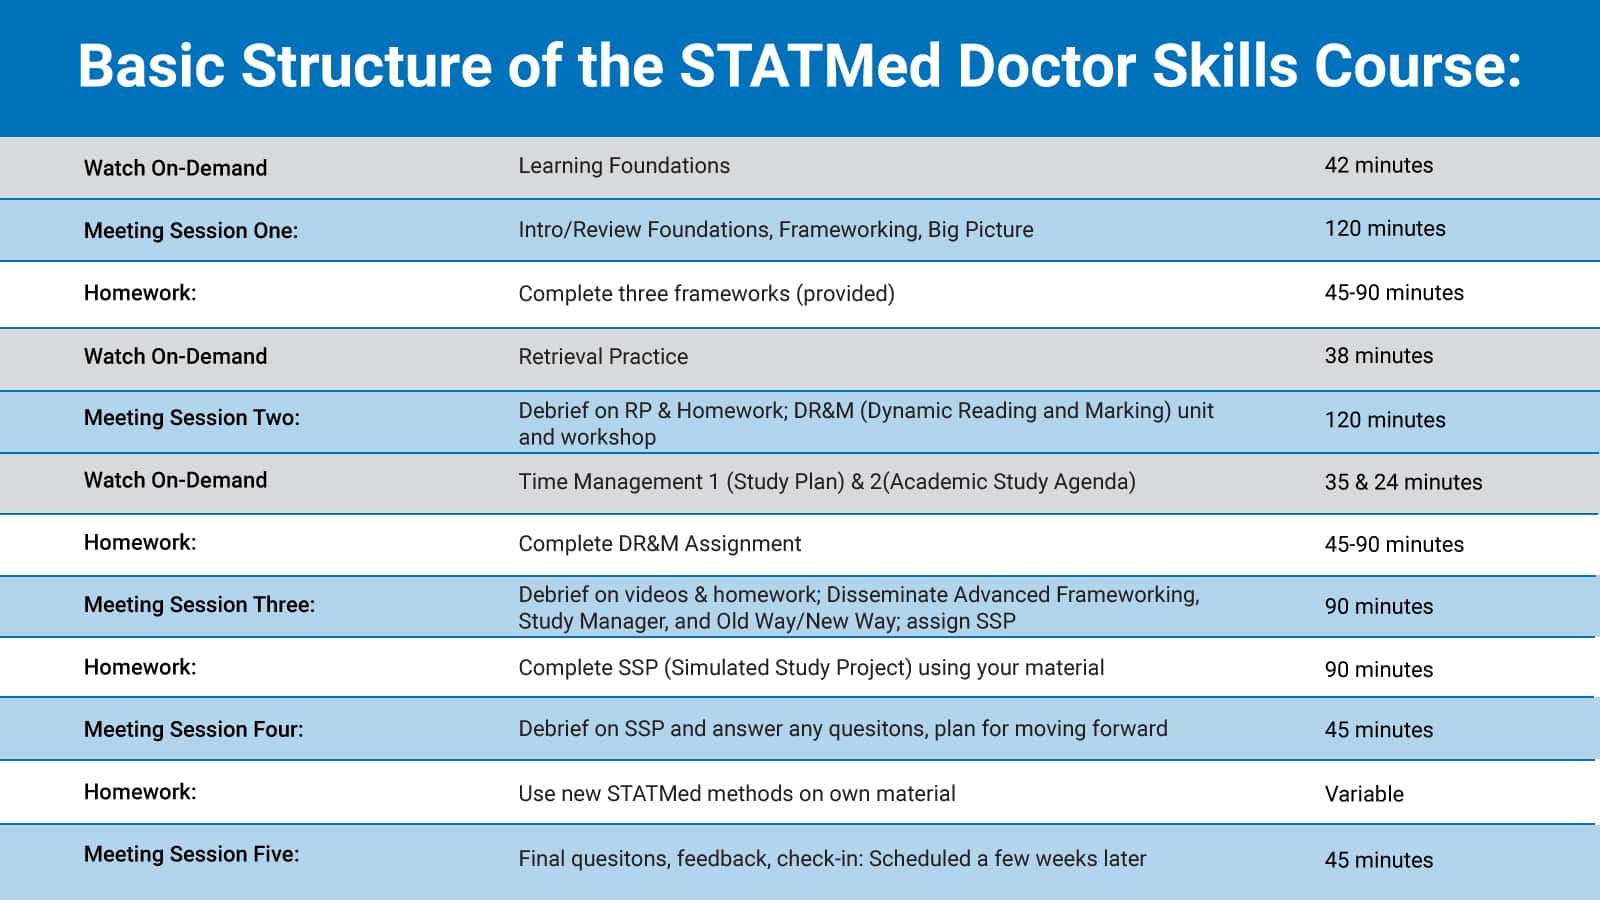 Infographic: Basic Structure of the STATMed Doctor Skills Course